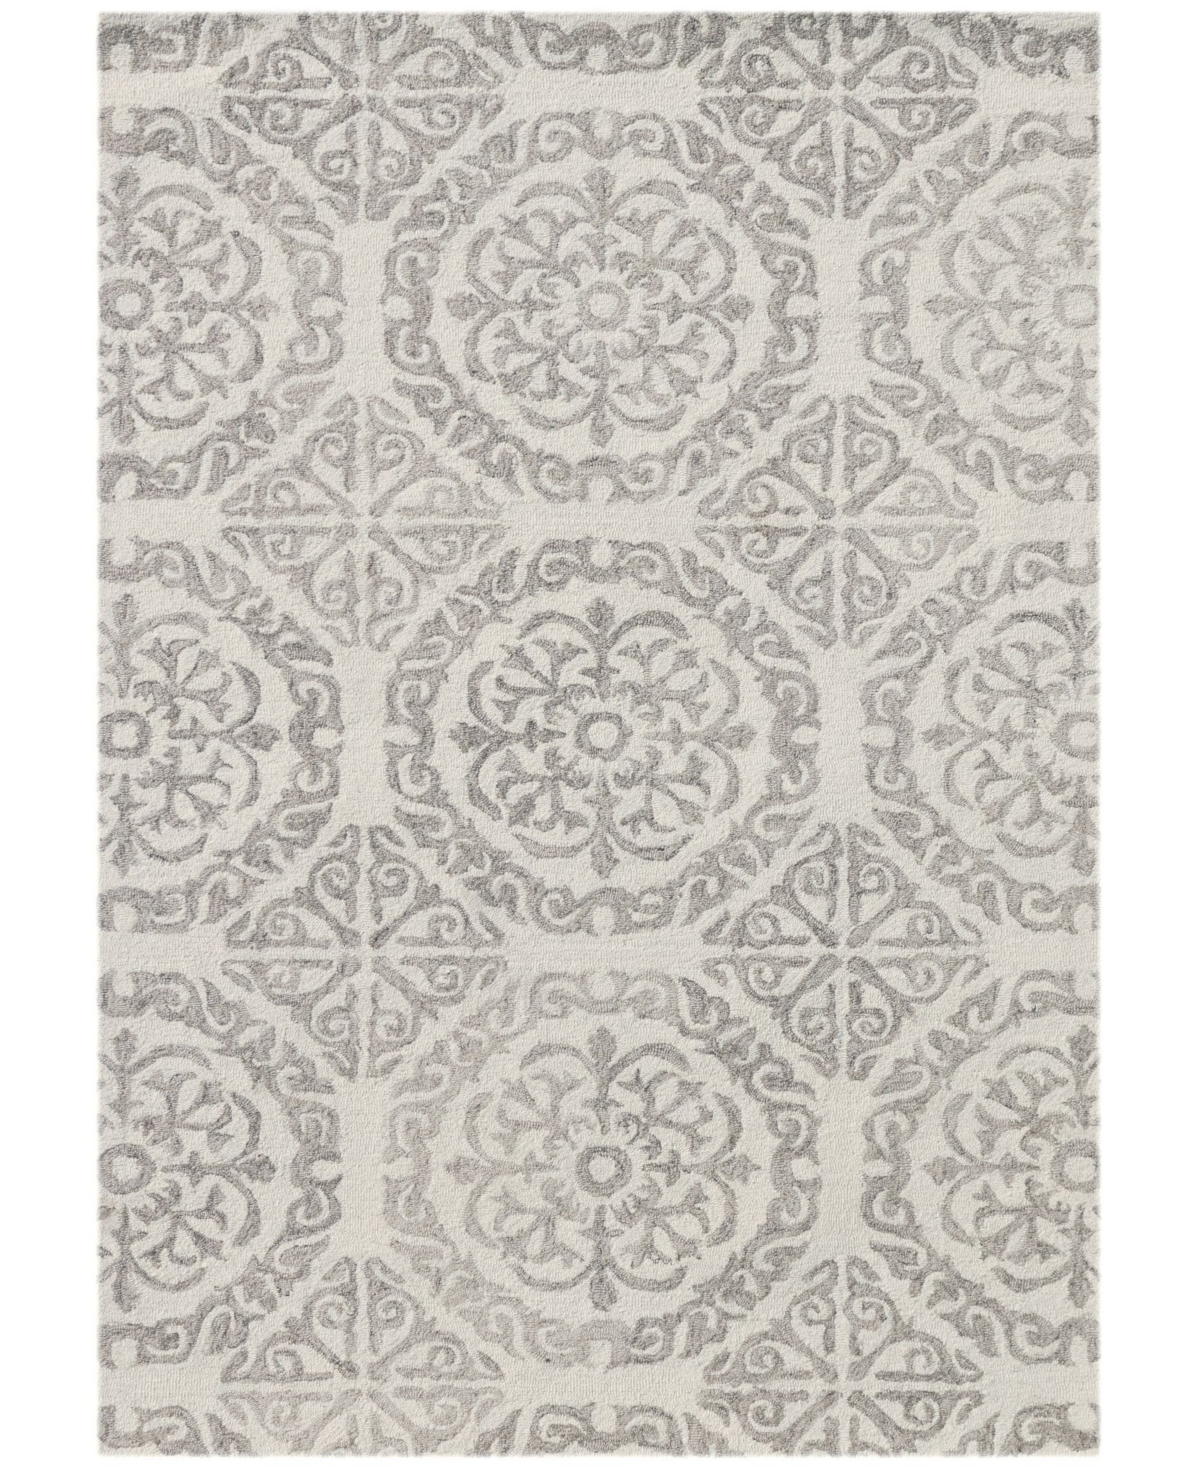 Amer Rugs Boston Bos-22 White 7'6in x 9'6in Area Rug - White